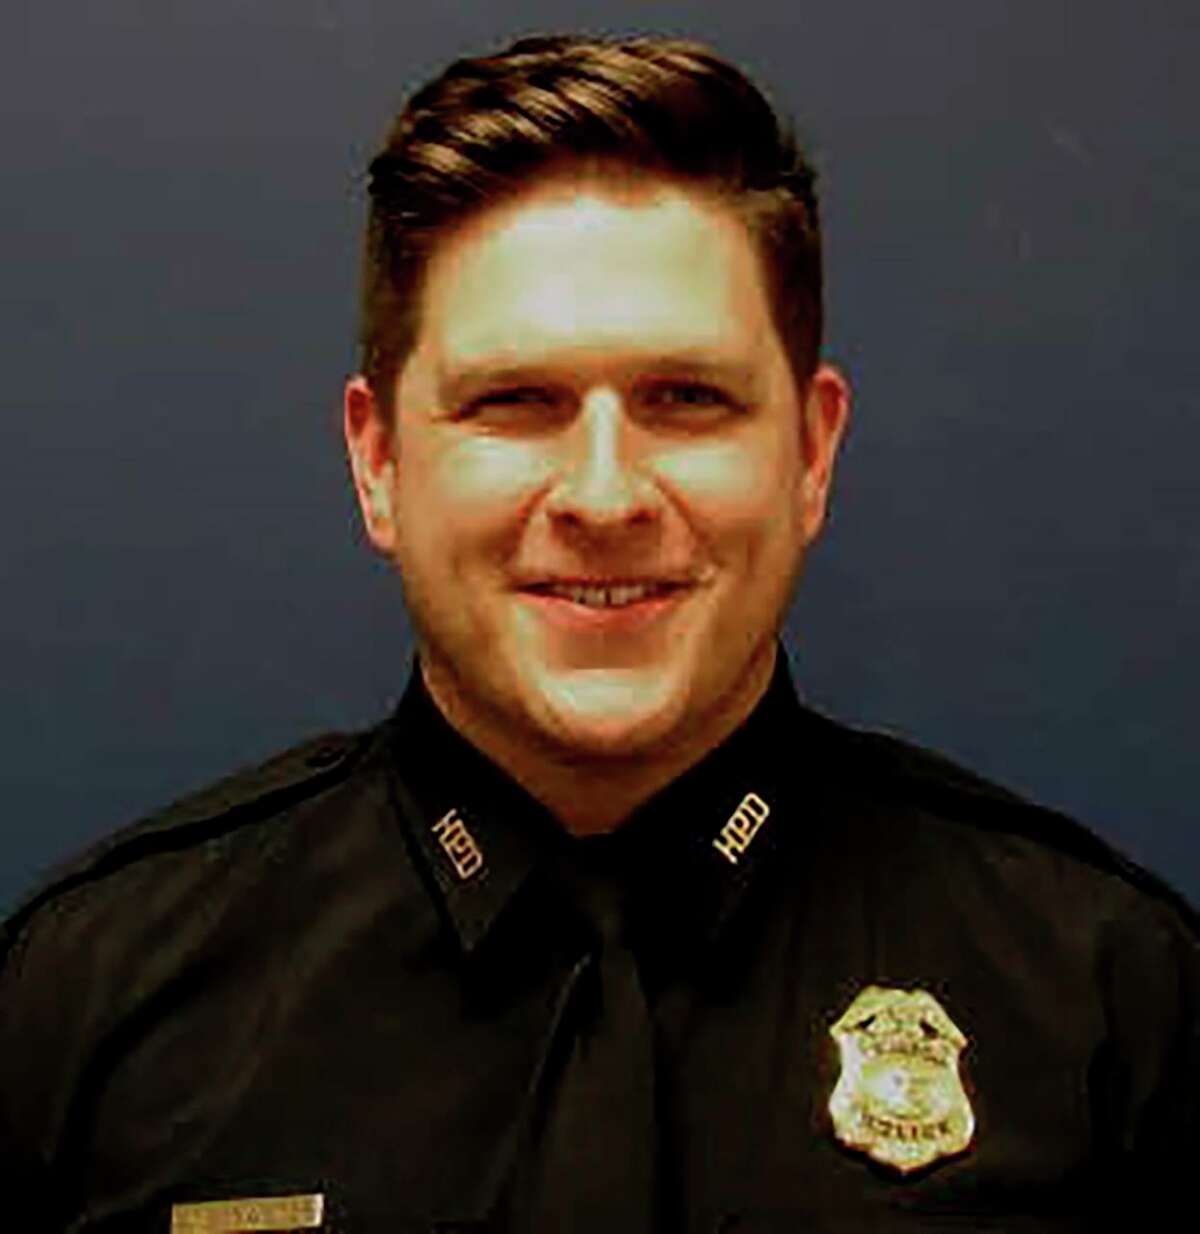 In this undated photo posted on Twitter and provided by the Houston Police Department is Sgt. Christopher Brewster, who was shot and killed Saturday evening, Dec. 7, 2019, by a man who had been reported for assault, authorities said. Police officials said in a tweet that the 32-year-old officer was shot just before 6 p.m. (Houston Police Department via AP)>>>See more for aftermath of the shooting...